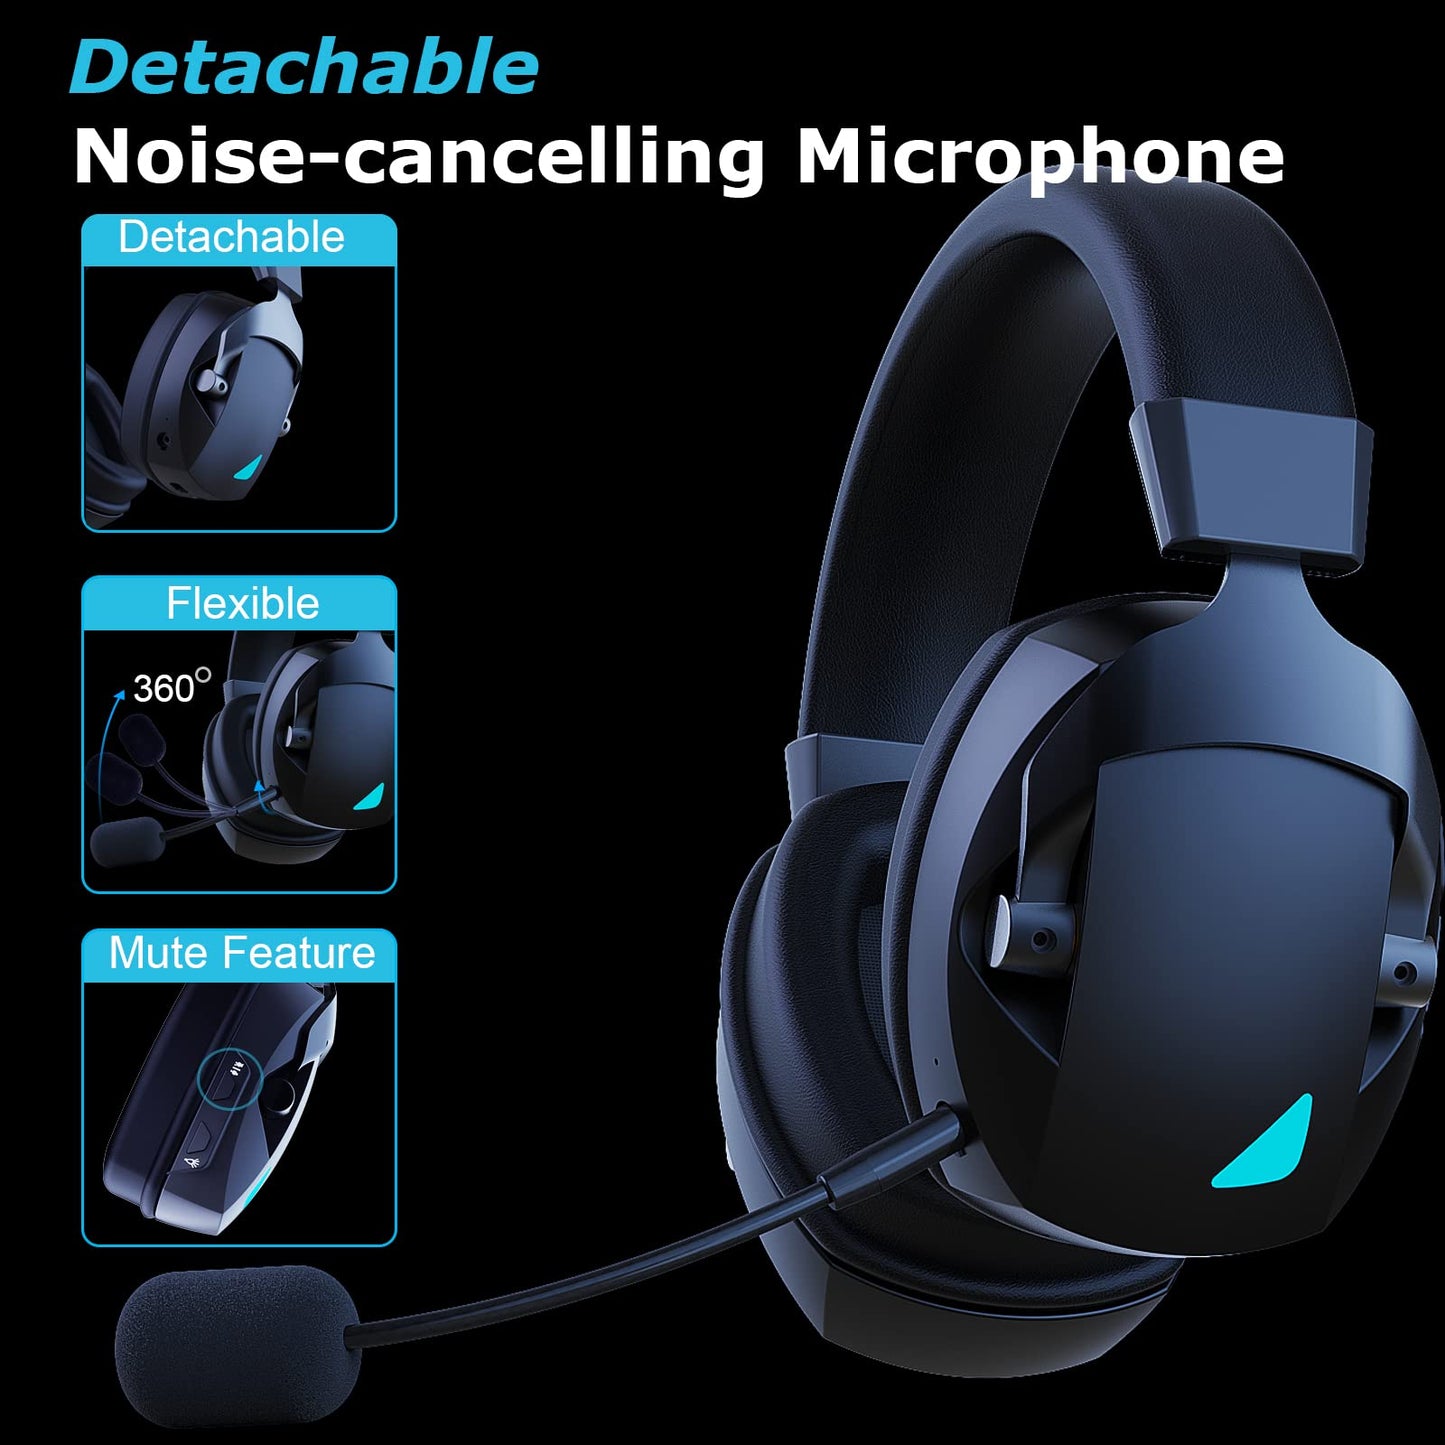 Acinaci Wireless Gaming Headset with Detachable Noise Cancelling Microphone, 2.4G Bluetooth - USB - 3.5mm Wired Jack 3 Modes Wireless Gaming Headphones for PC, PS4, PS5, Mac, Switch, Phone, Tablet - amzGamess